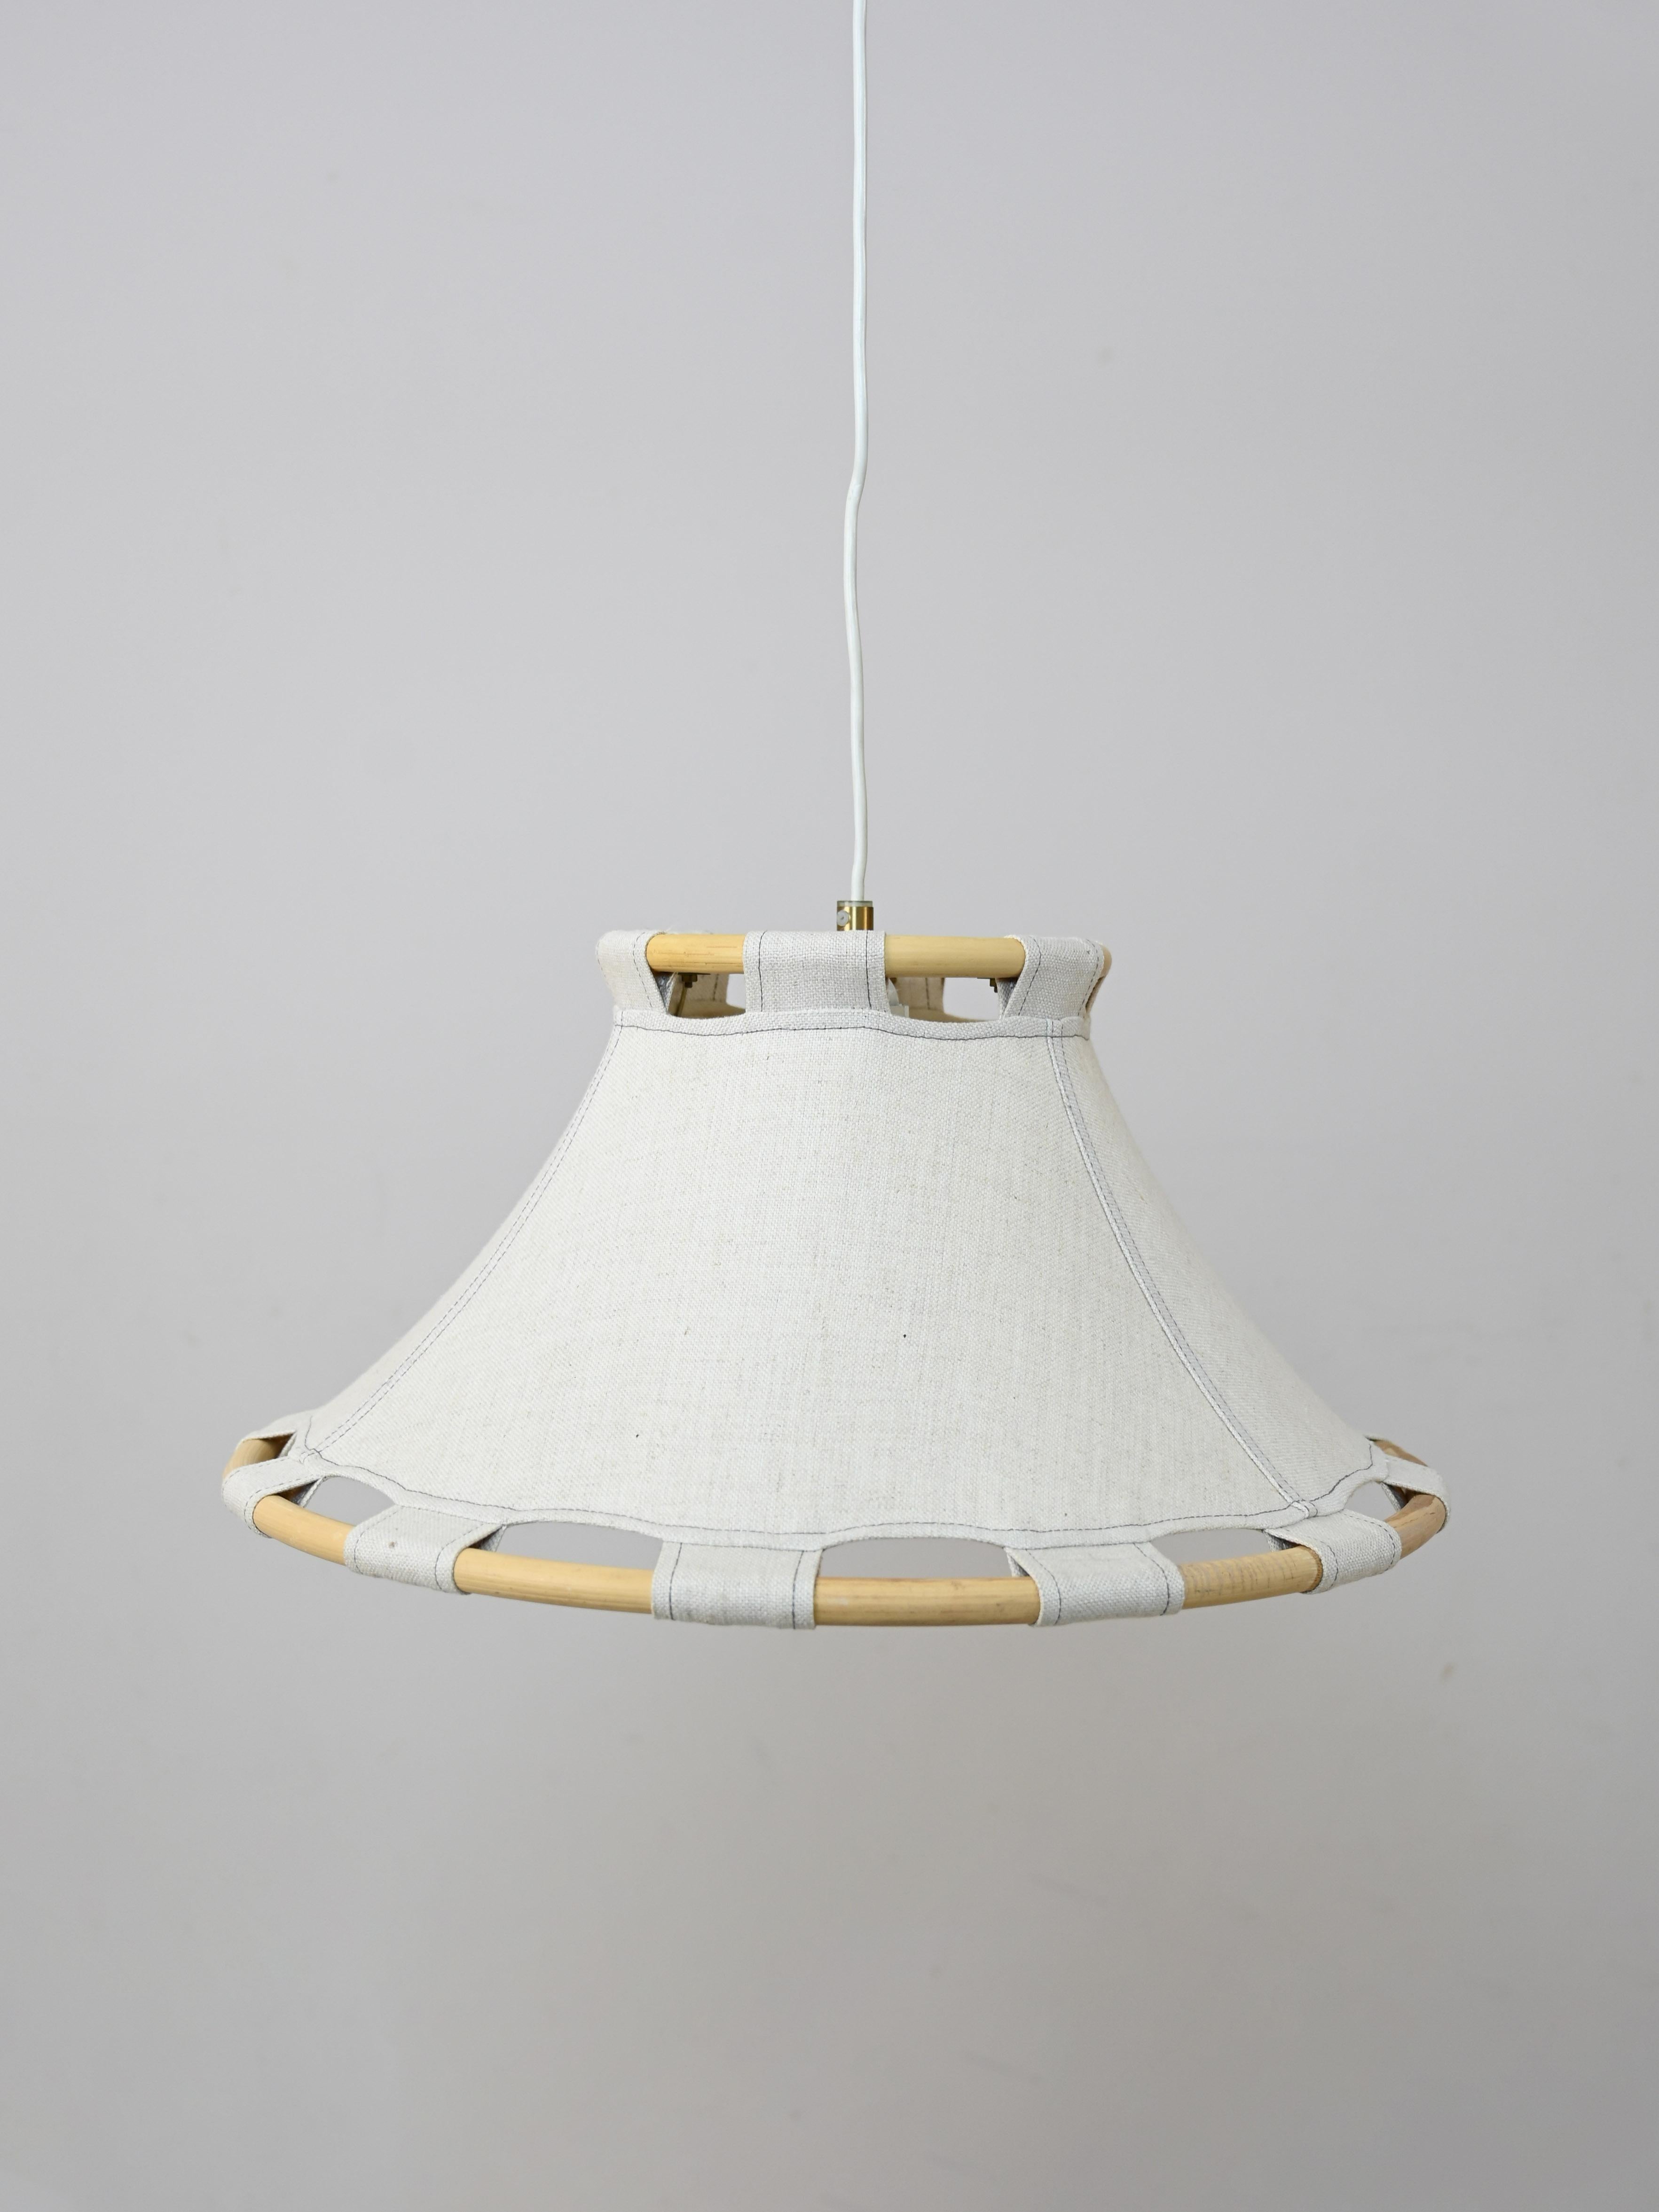 Vintage lamp designed for Ateljé Lyktan in the 1970s.

This piece of original Scandinavian design is an elegant mix of different materials, the shade is made of canvas, the frame is made of bamboo and the light is filtered by a plexiglass